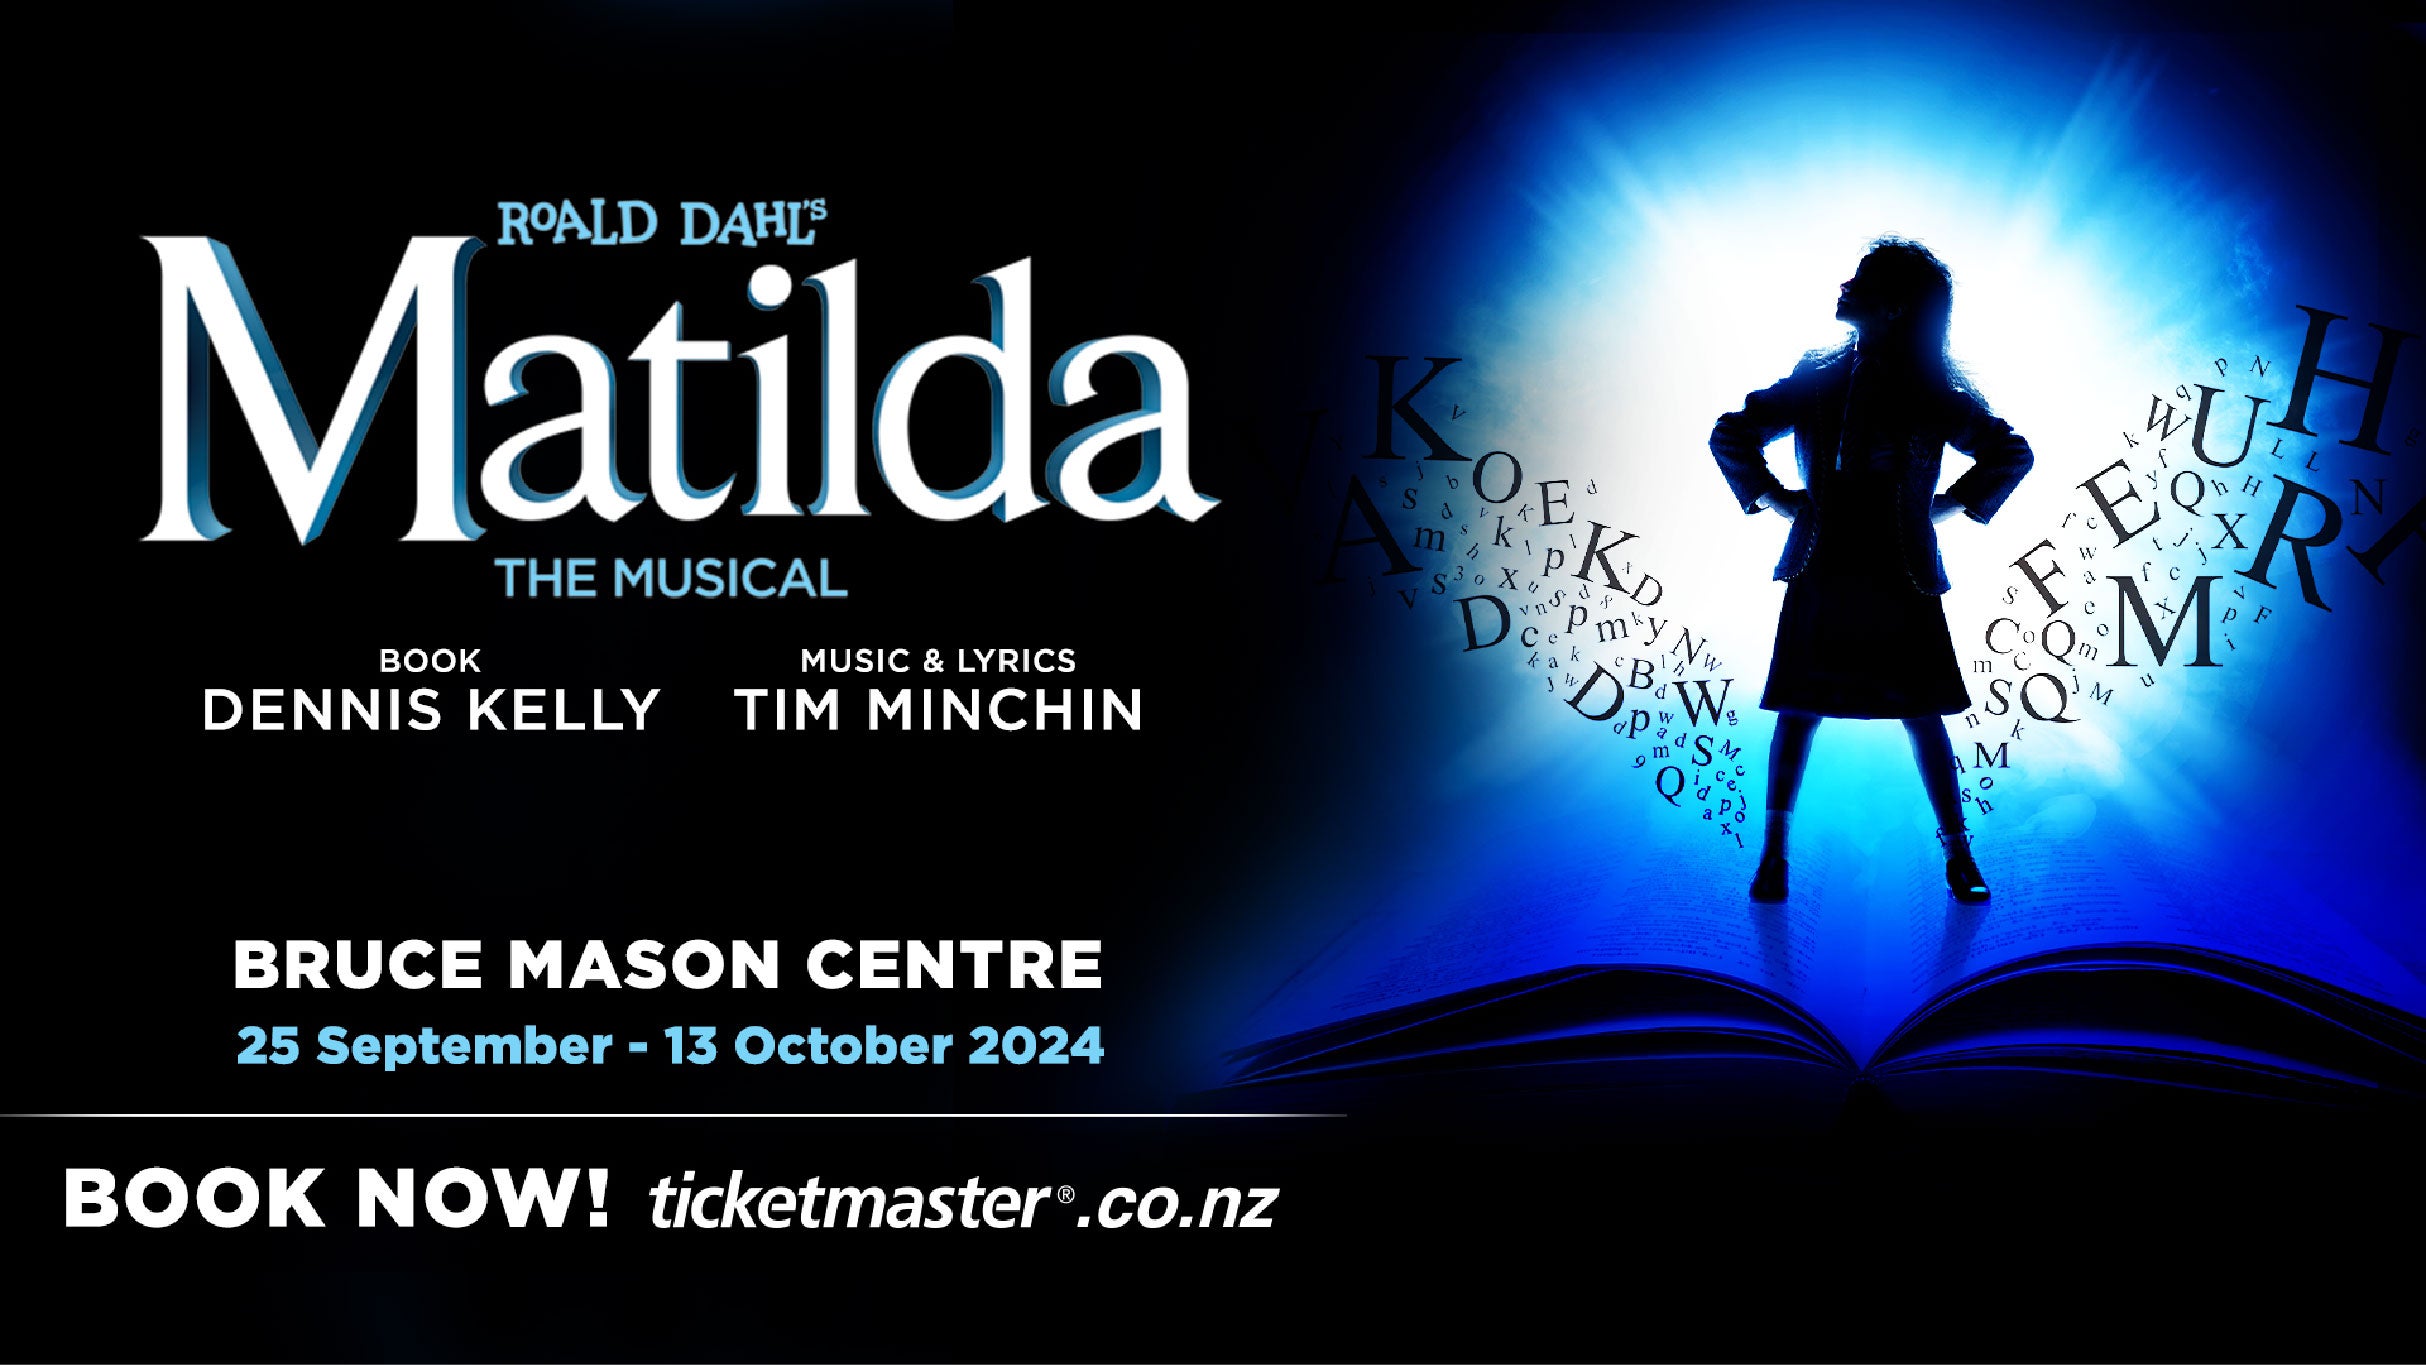 Image used with permission from Ticketmaster | Matilda tickets